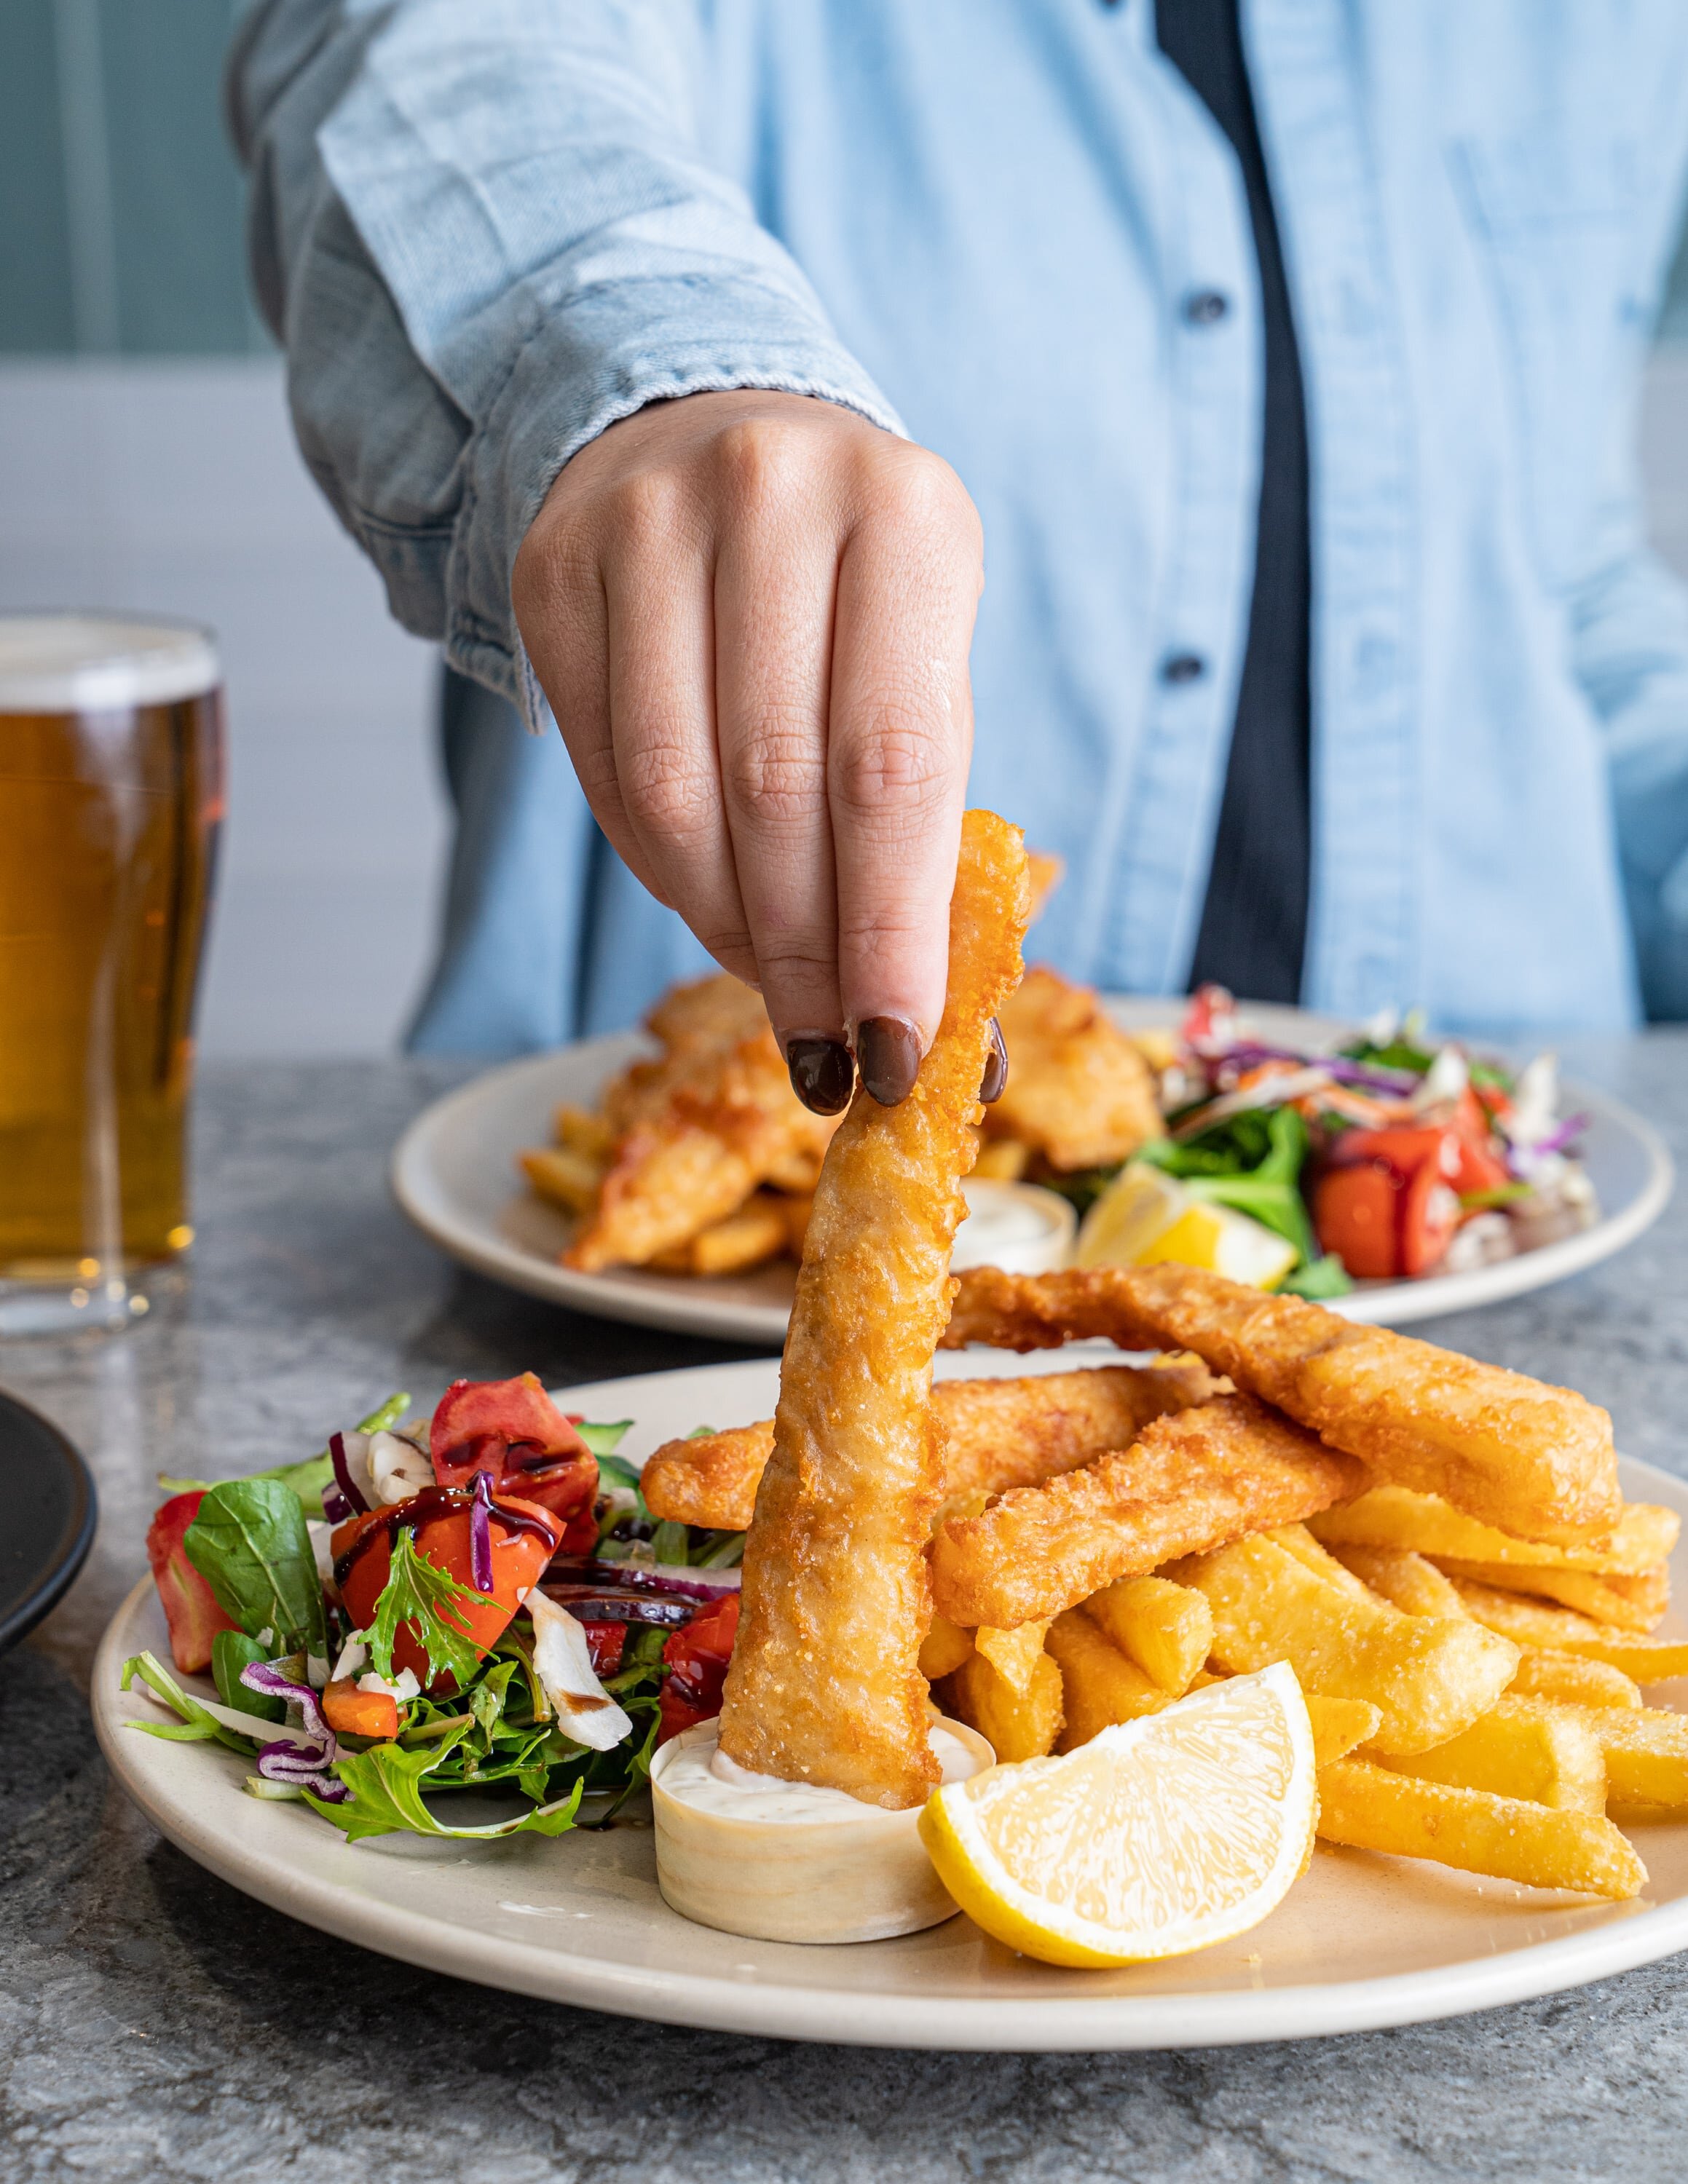 Fish and chips with garden salad